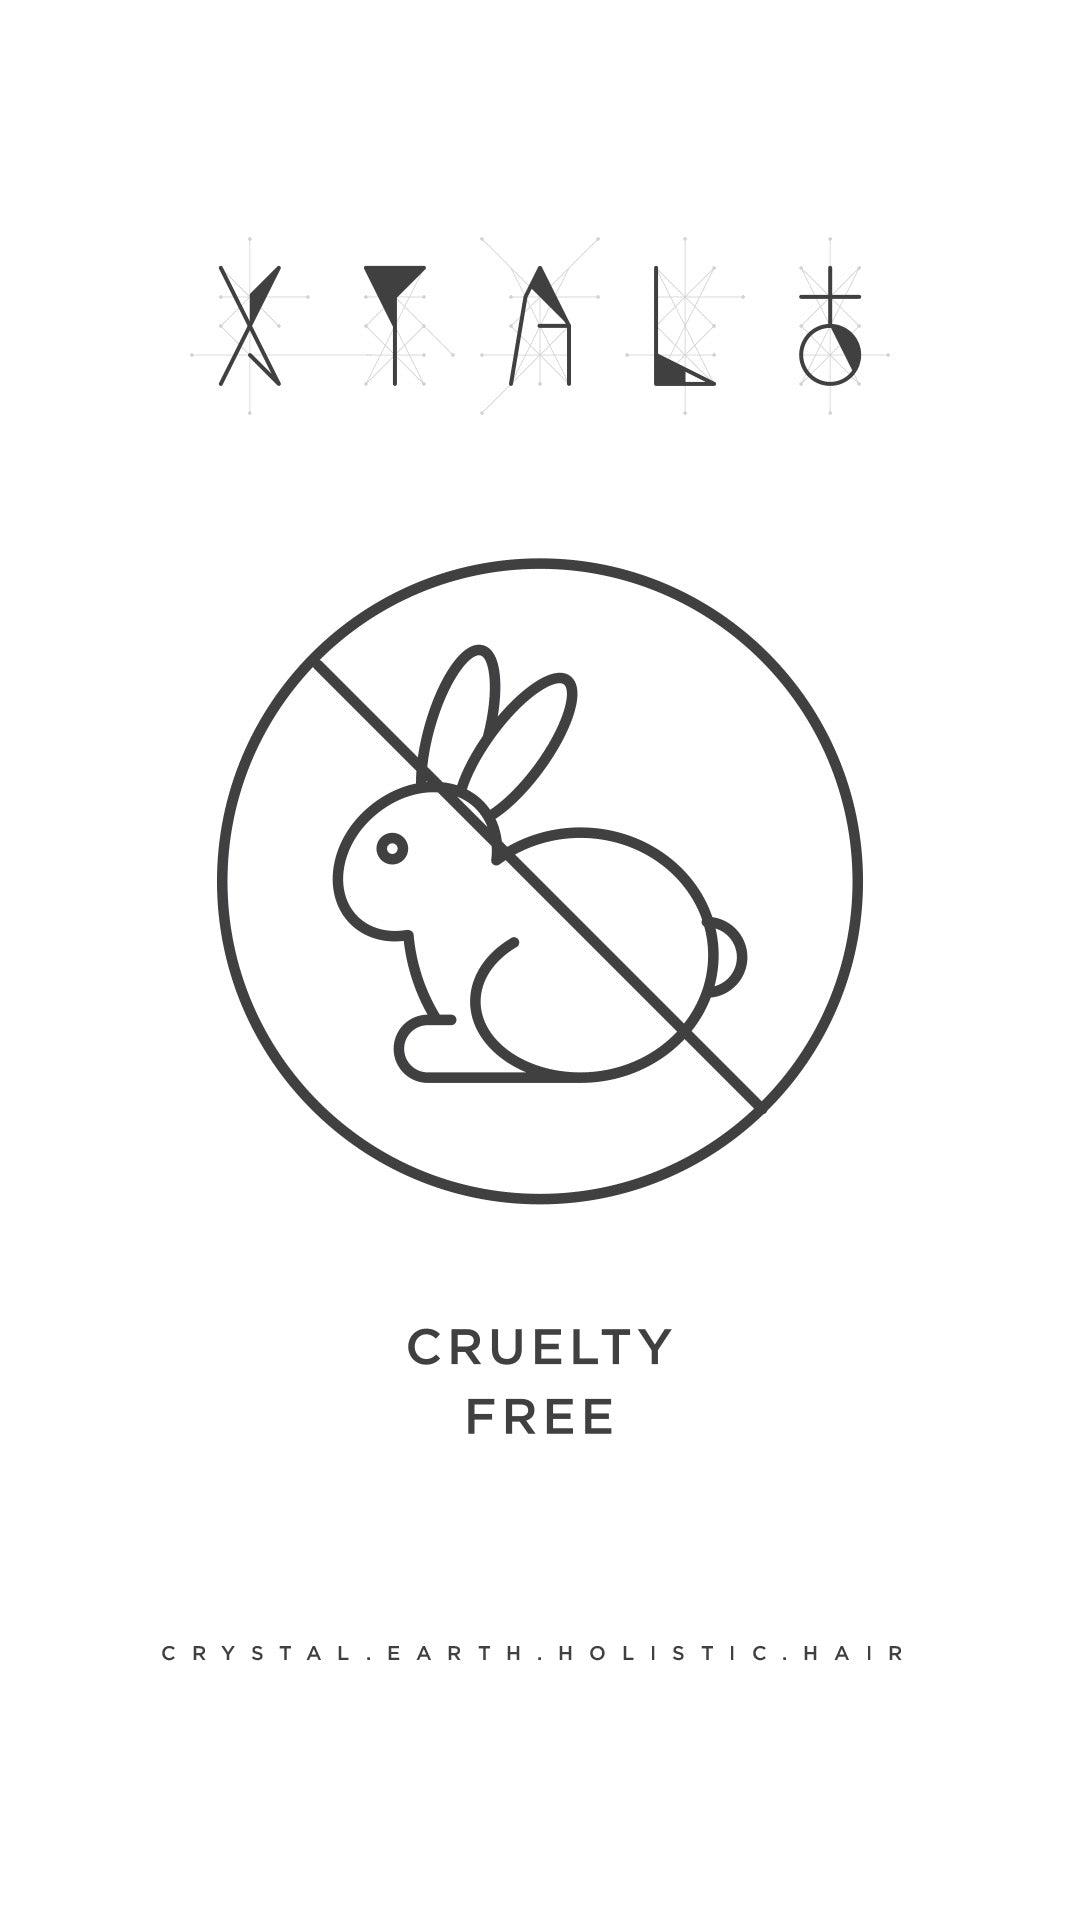 What's the difference between vegan + cruelty-free?